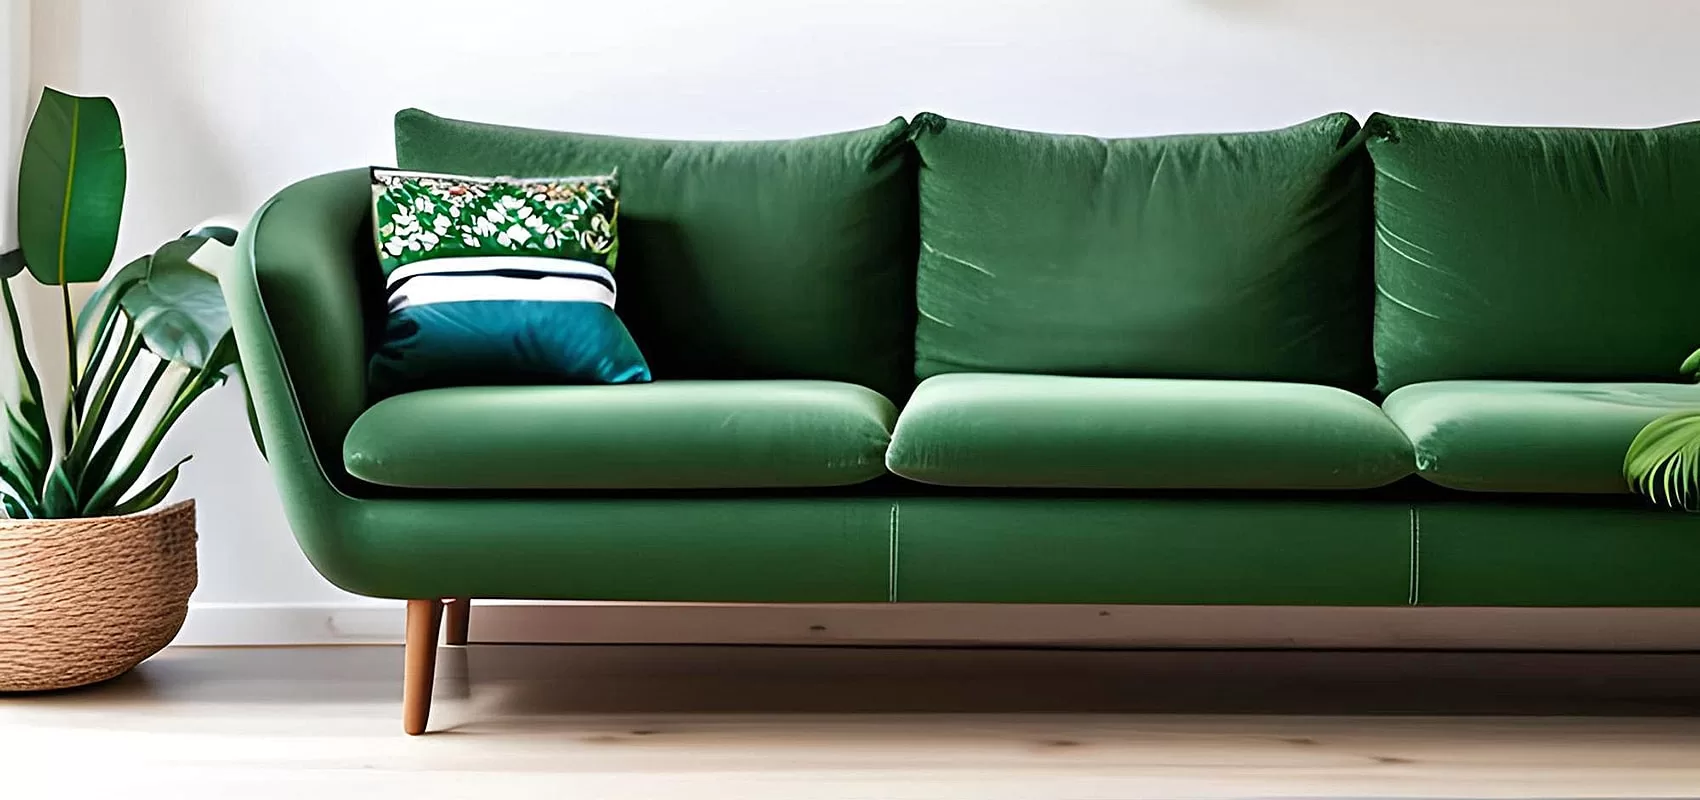 Selecting the Perfect Green Couch | Green Sofa Ideas | Green Sofa Set